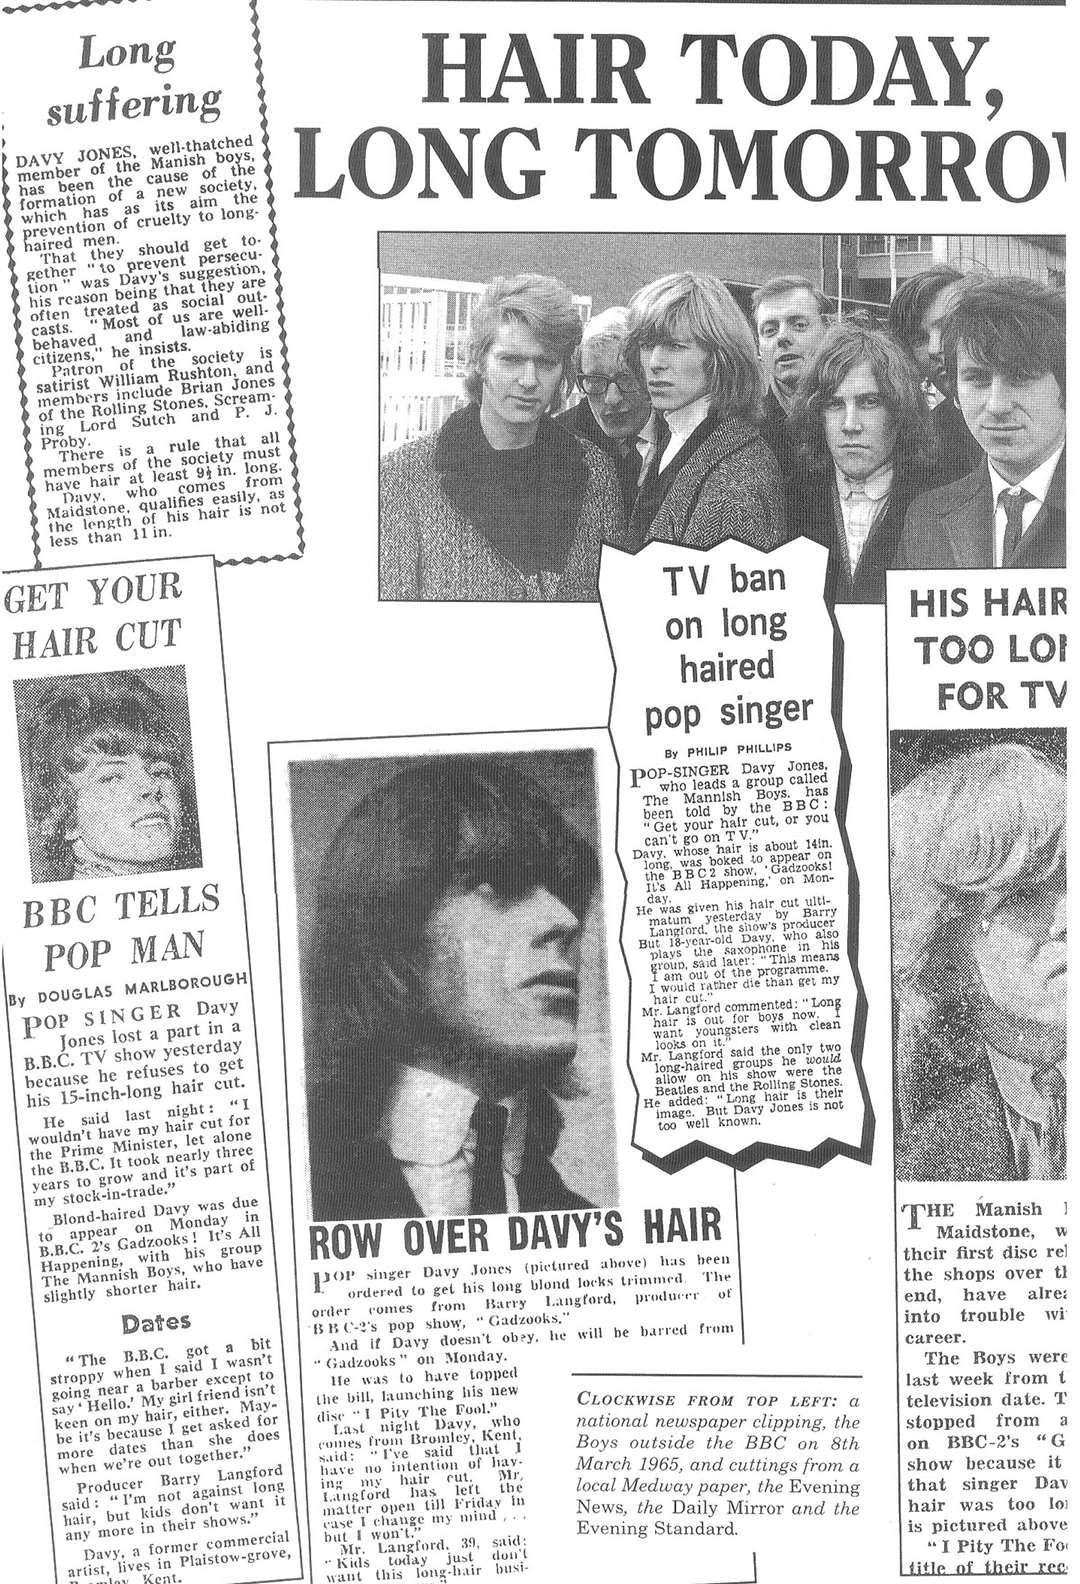 A selection of press cuttings from the 1960s, about the Maidstone-based Manish Boys, kept by drummer Mike Whitehead